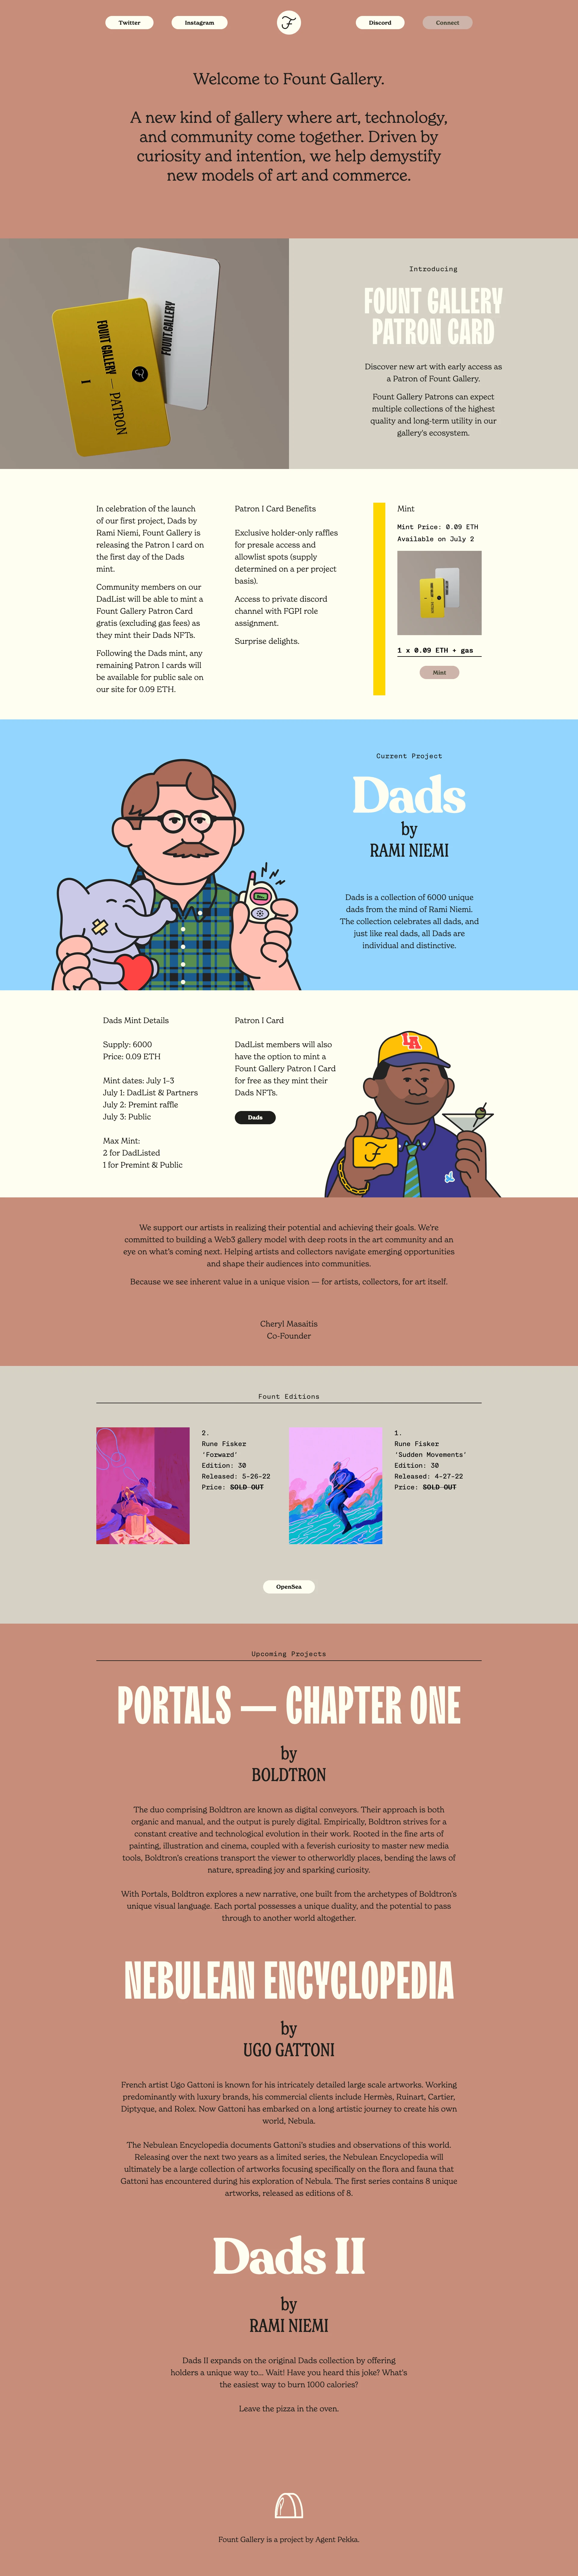 Fount Gallery Landing Page Example: A new kind of gallery where art, technology, and community come together. Driven by curiosity and intention, we help demystify new models of art and commerce.